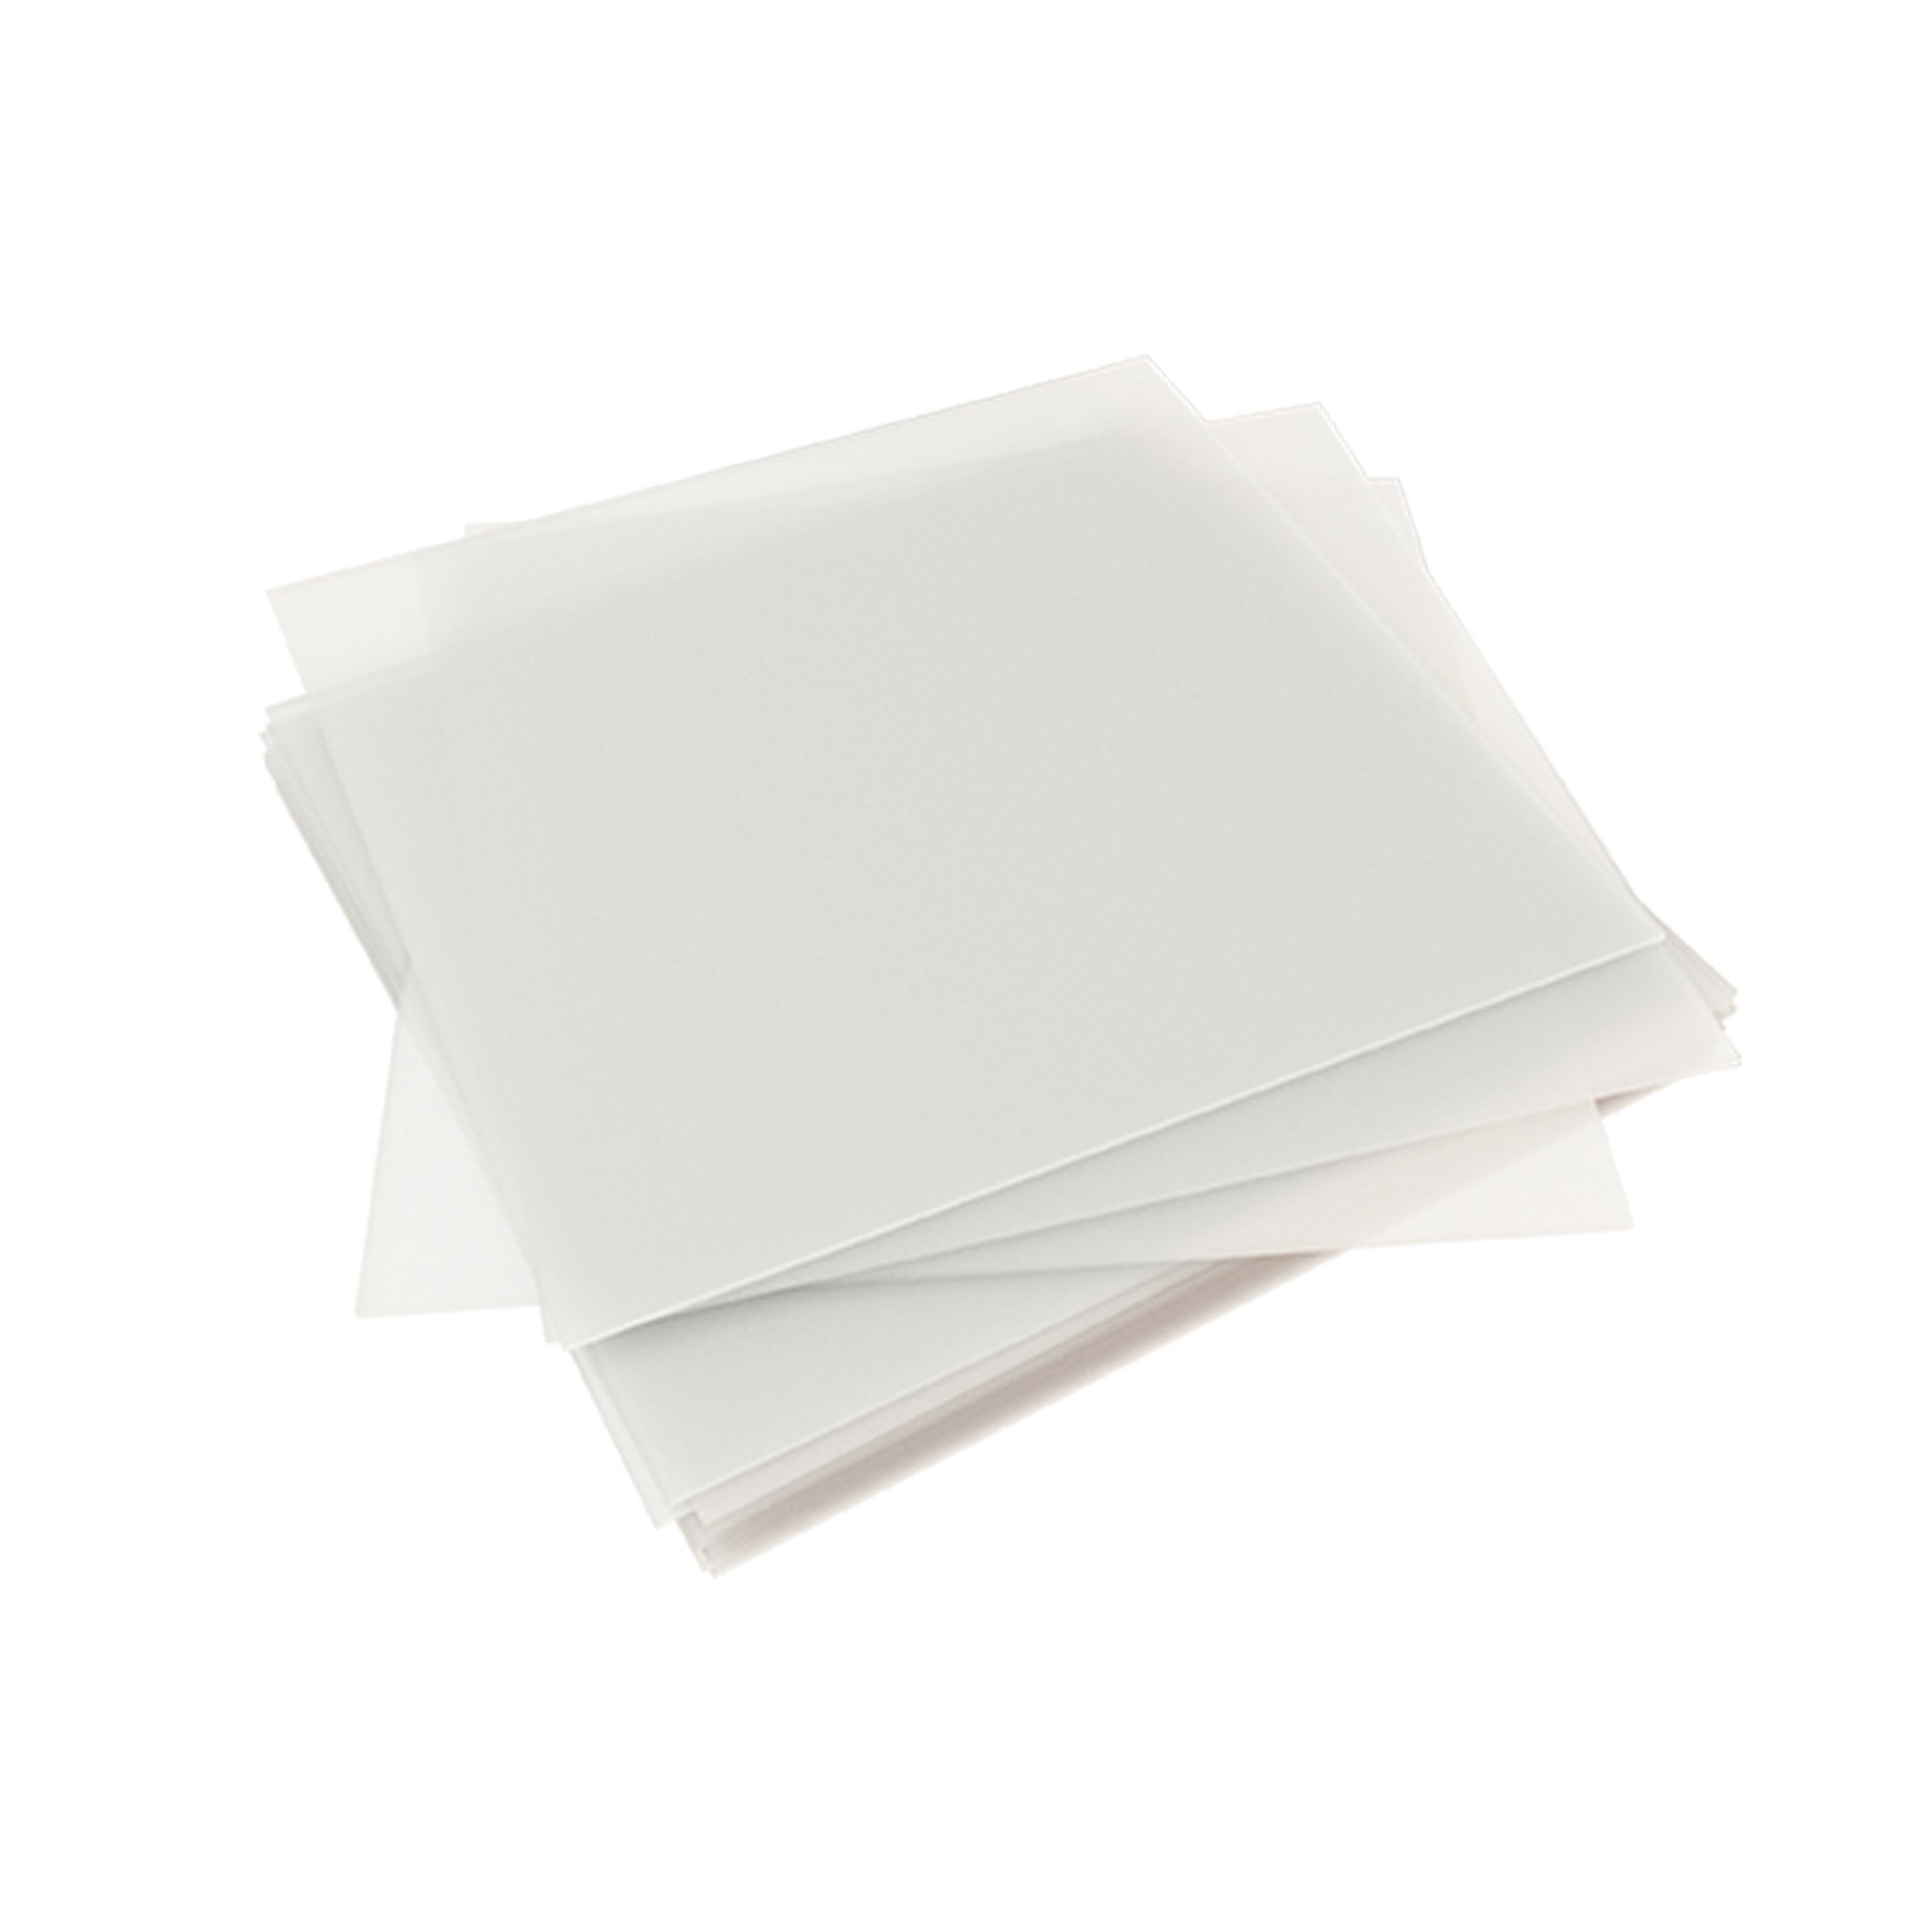 DSI Soft Vacuum Forming Plates For Whitening Trays 125x125mm